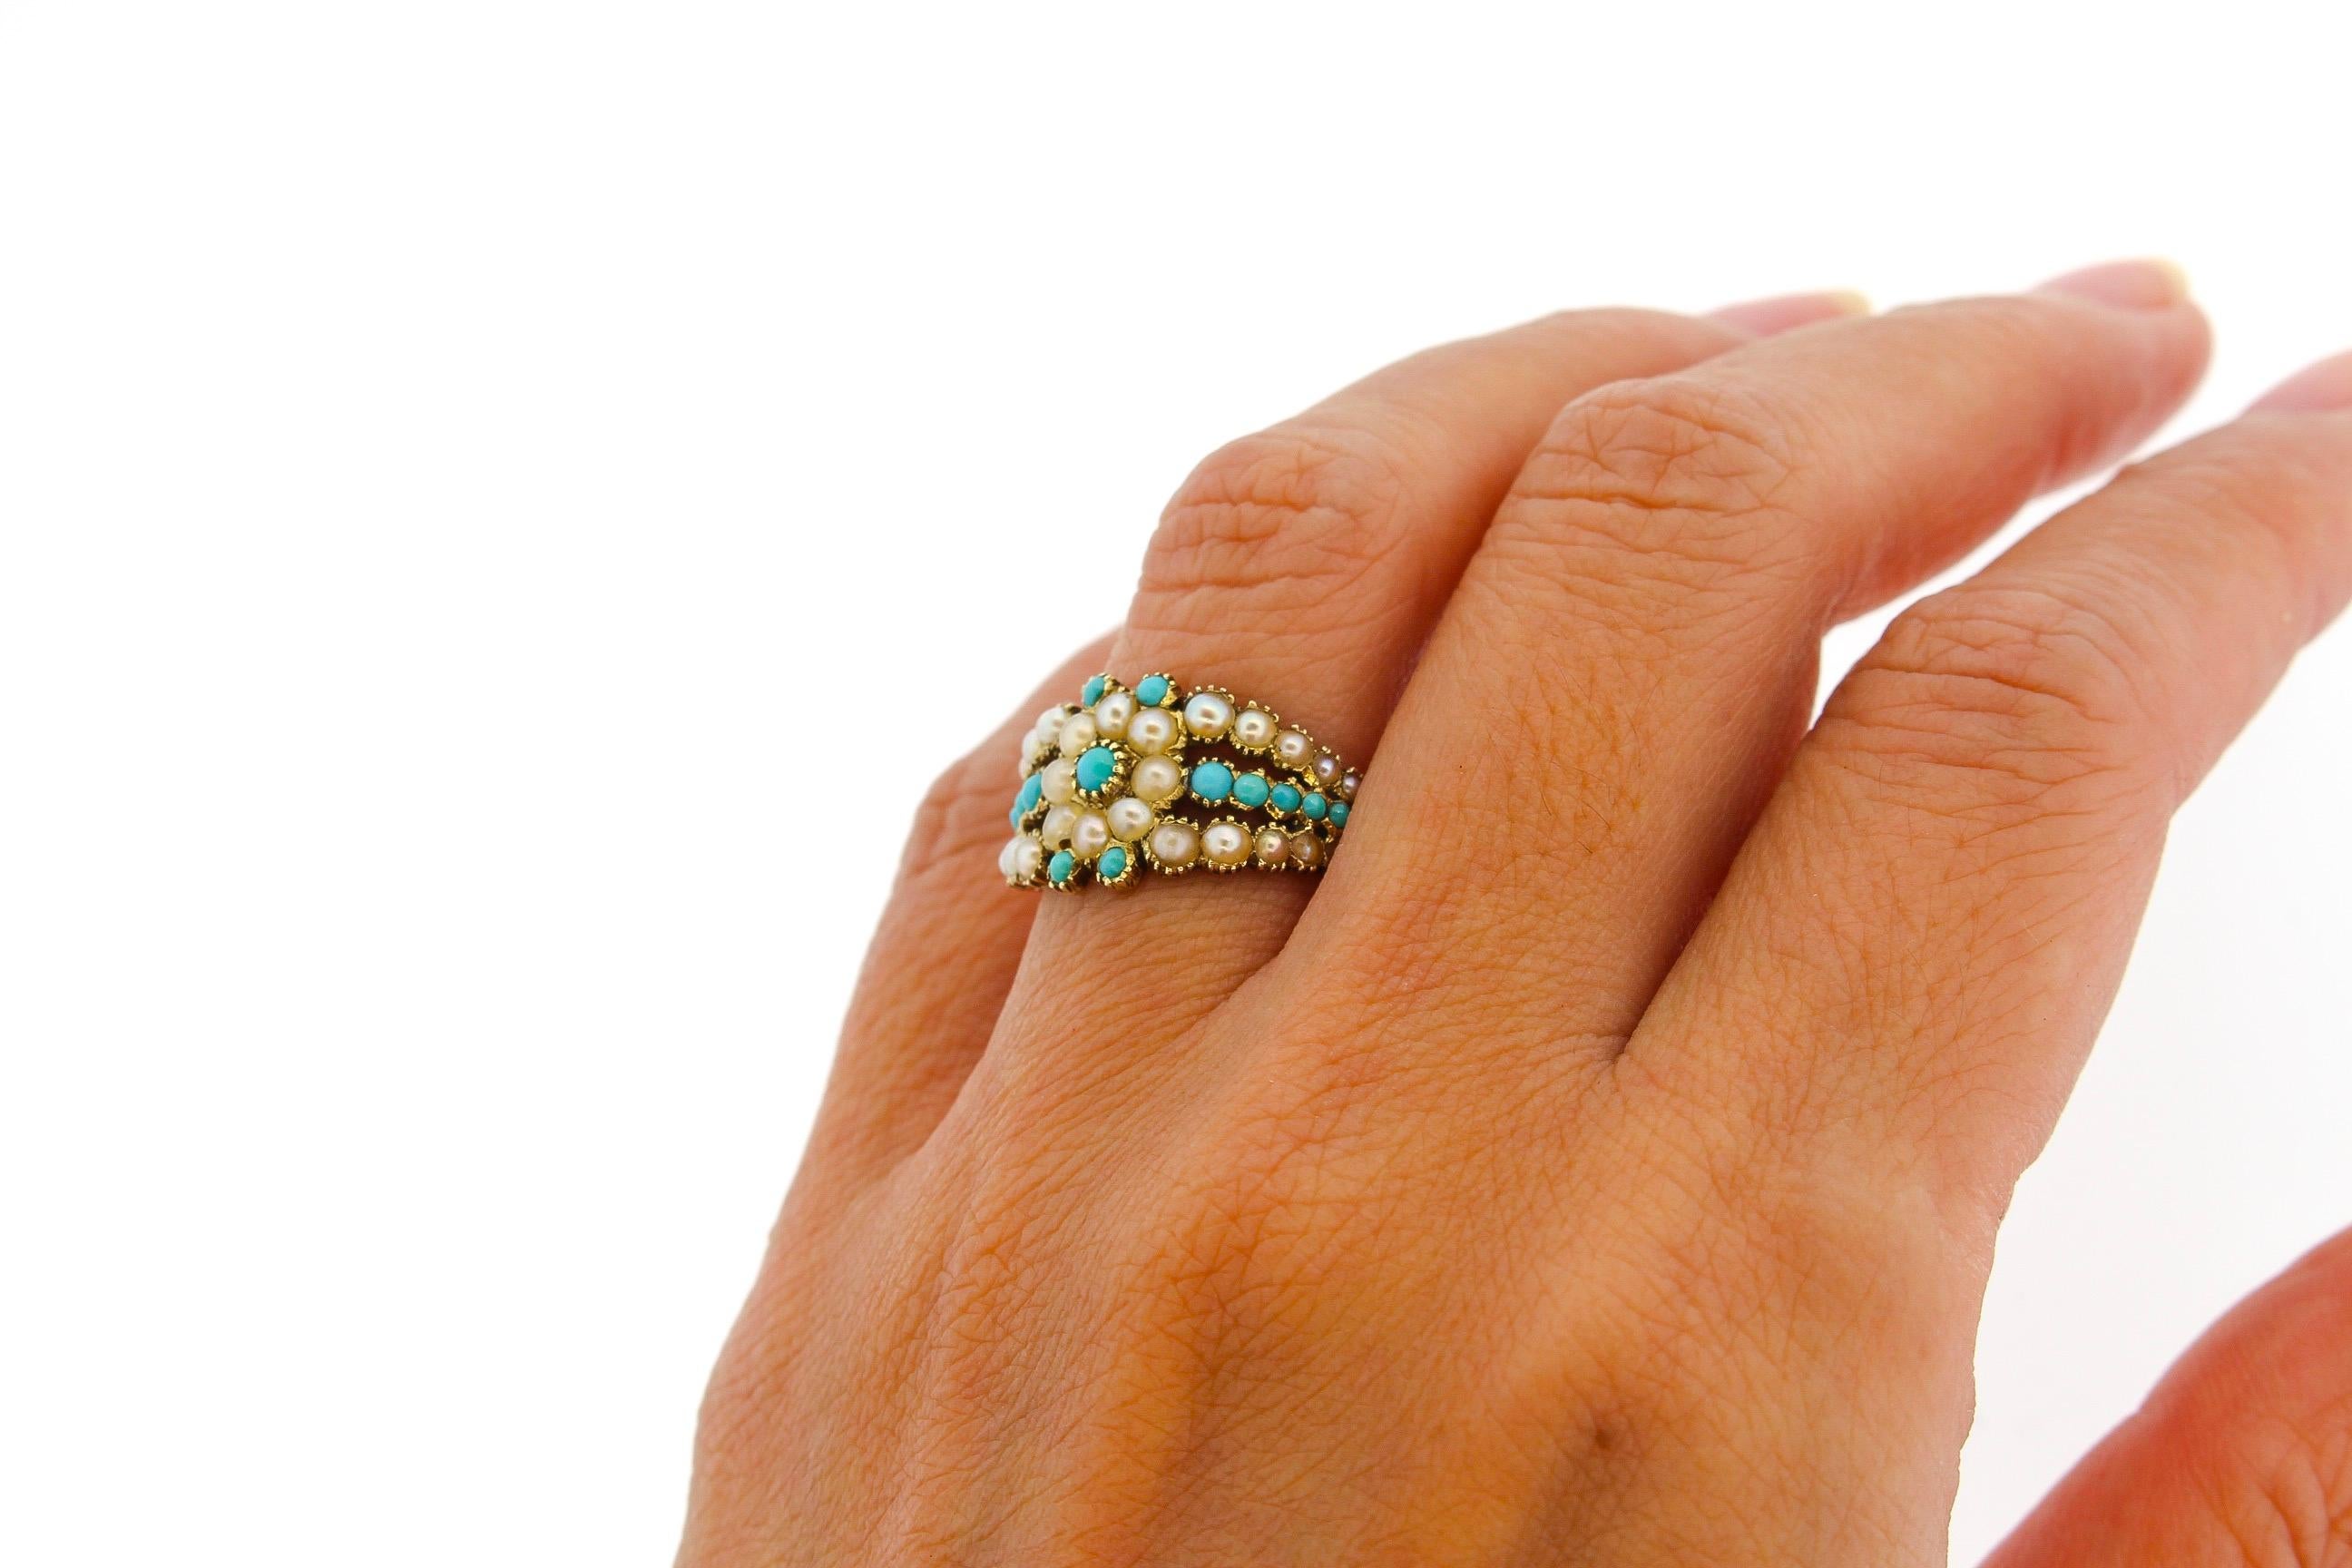 A lovely Georgian turquoise and split pearl 15k gold engraved ring. This ring is so charming with its floral design, bright colors and width. The shank is even more delightful with its heavy engraving. Absolutely a little gem of an antique ring in